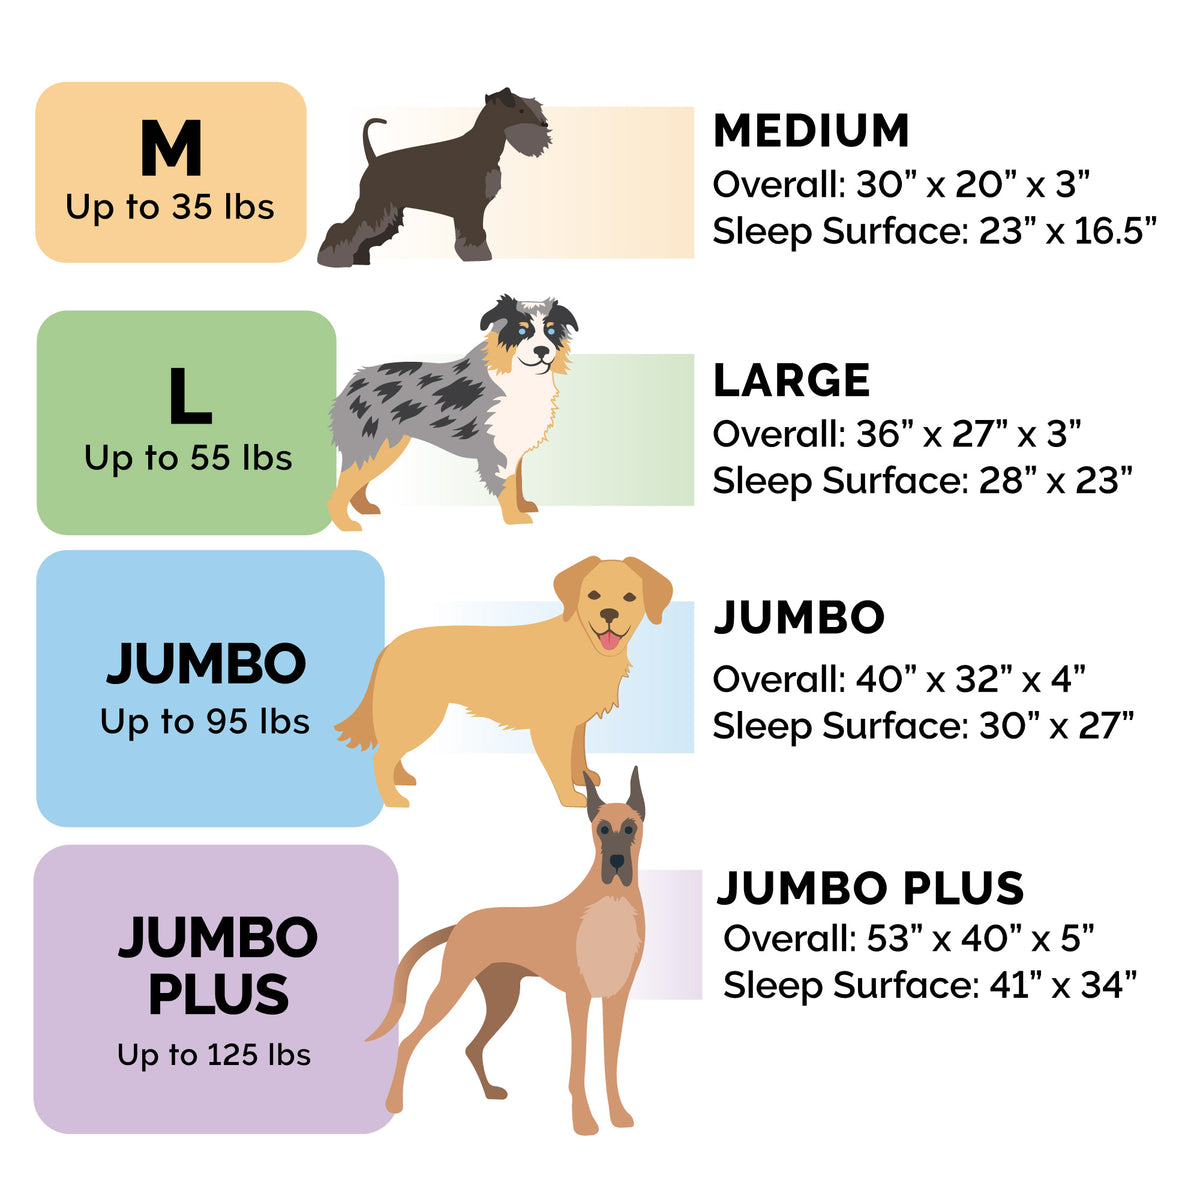 Size Chart for Furhaven Beds